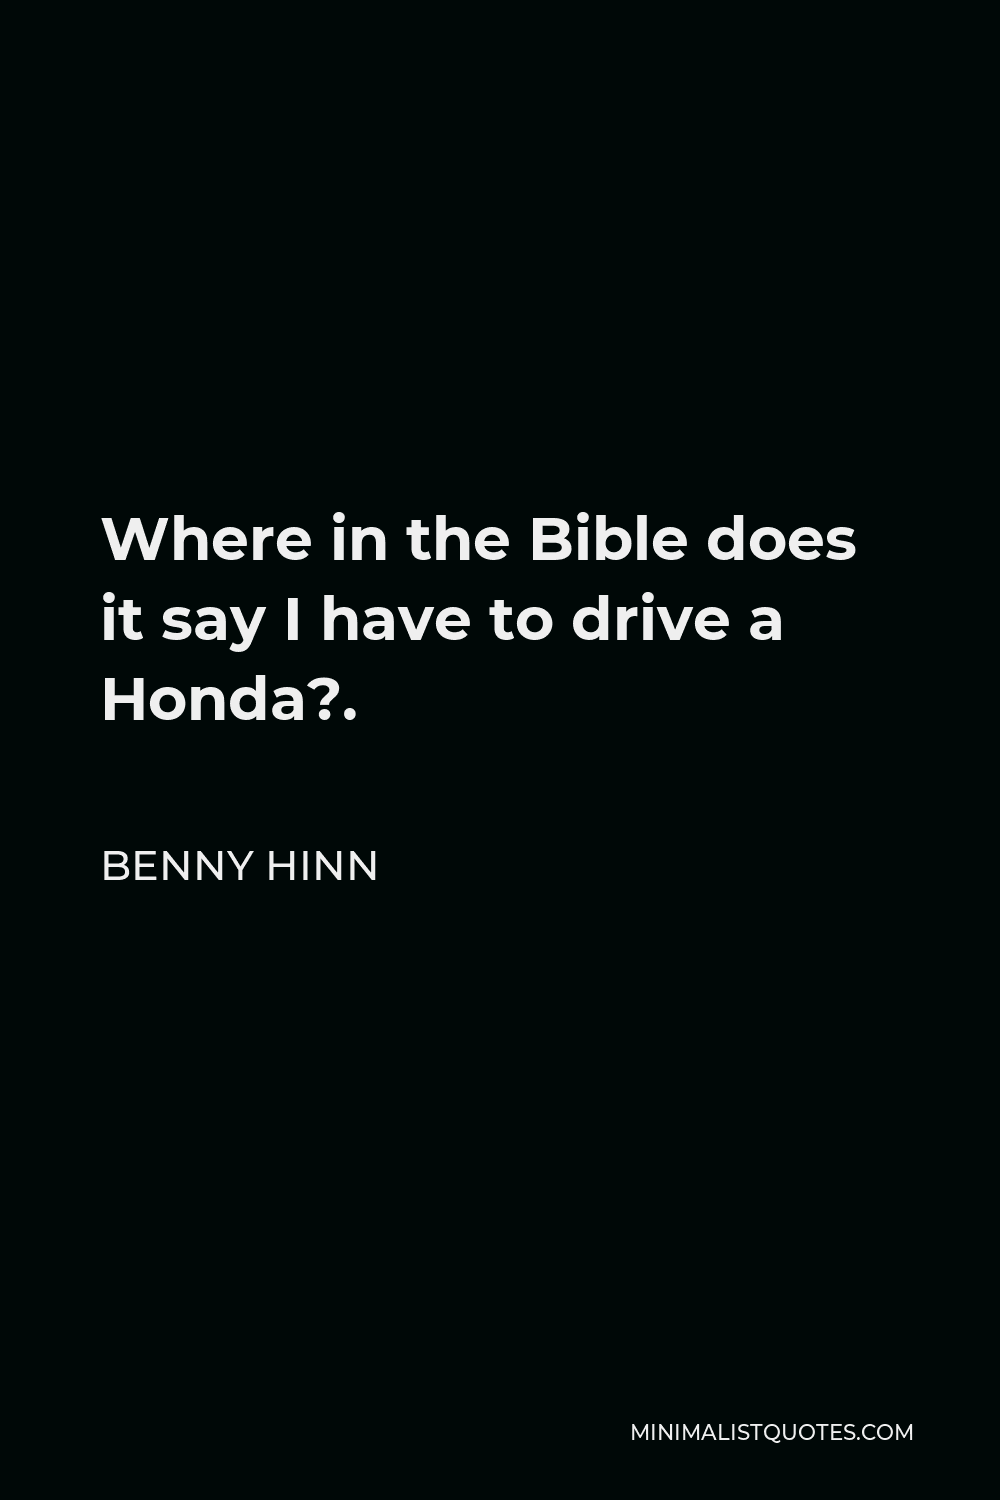 Benny Hinn Quote - Where in the Bible does it say I have to drive a Honda?.